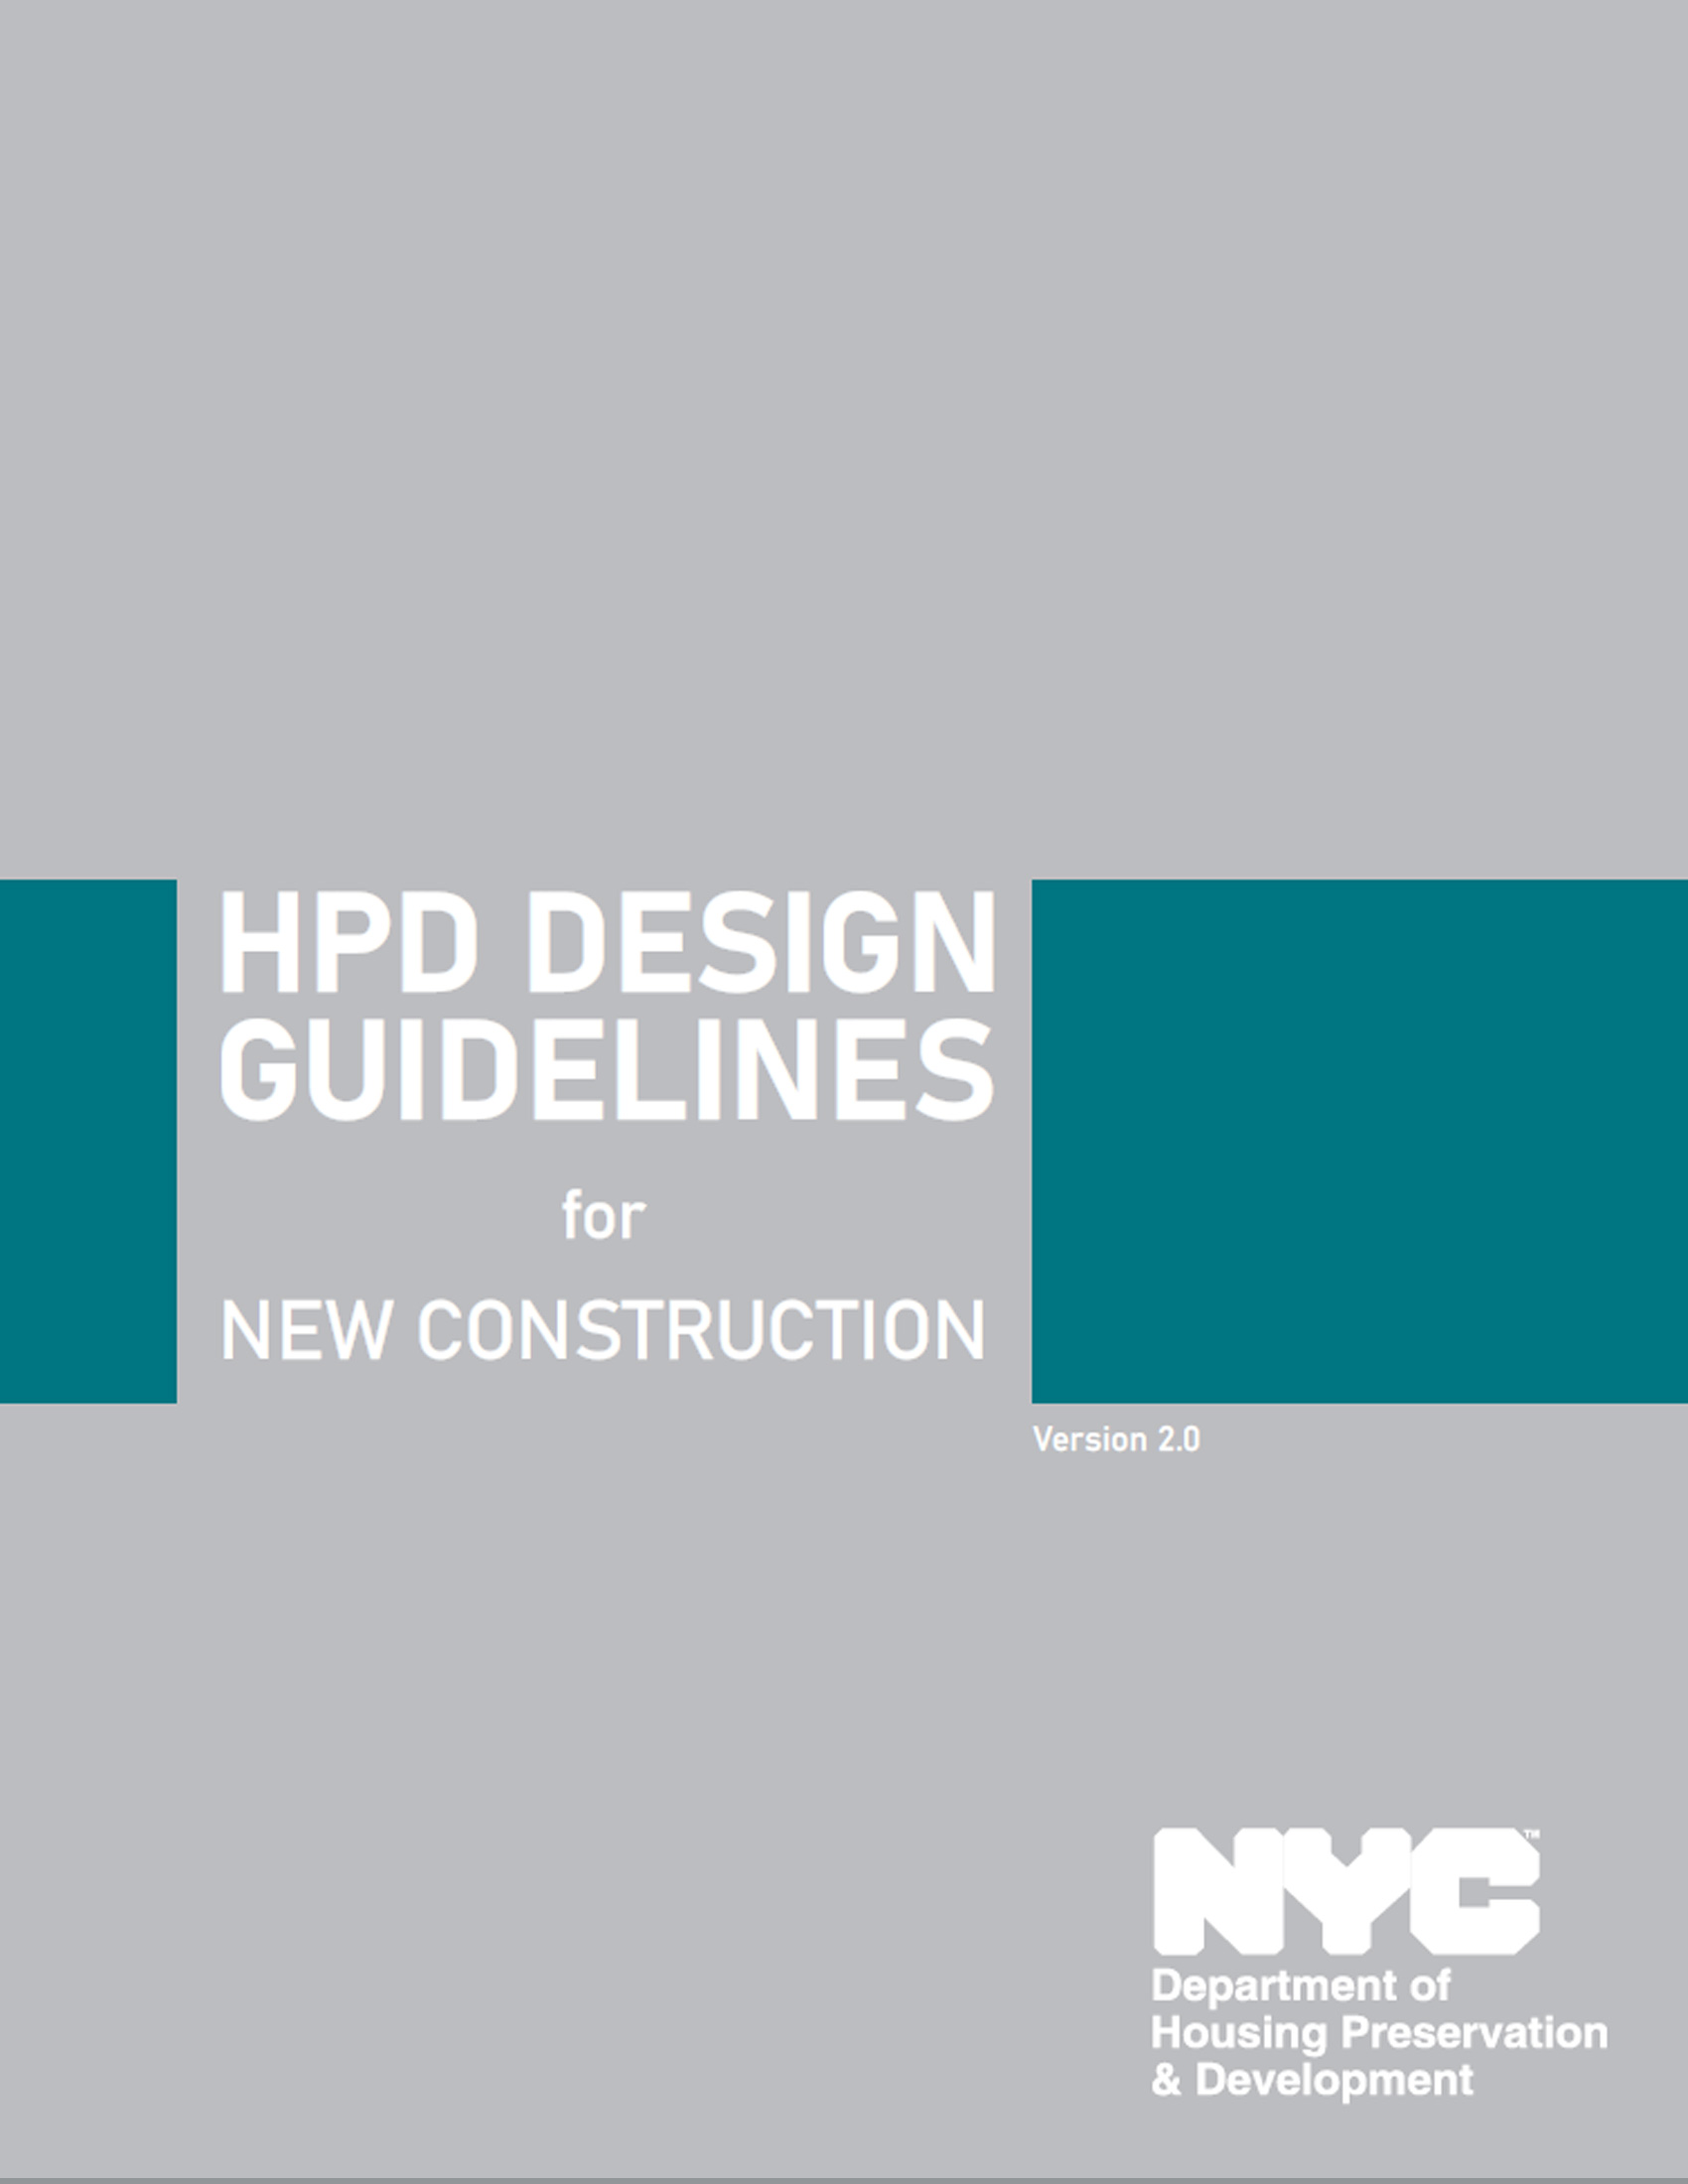 HPD Design Guidelines cover page.